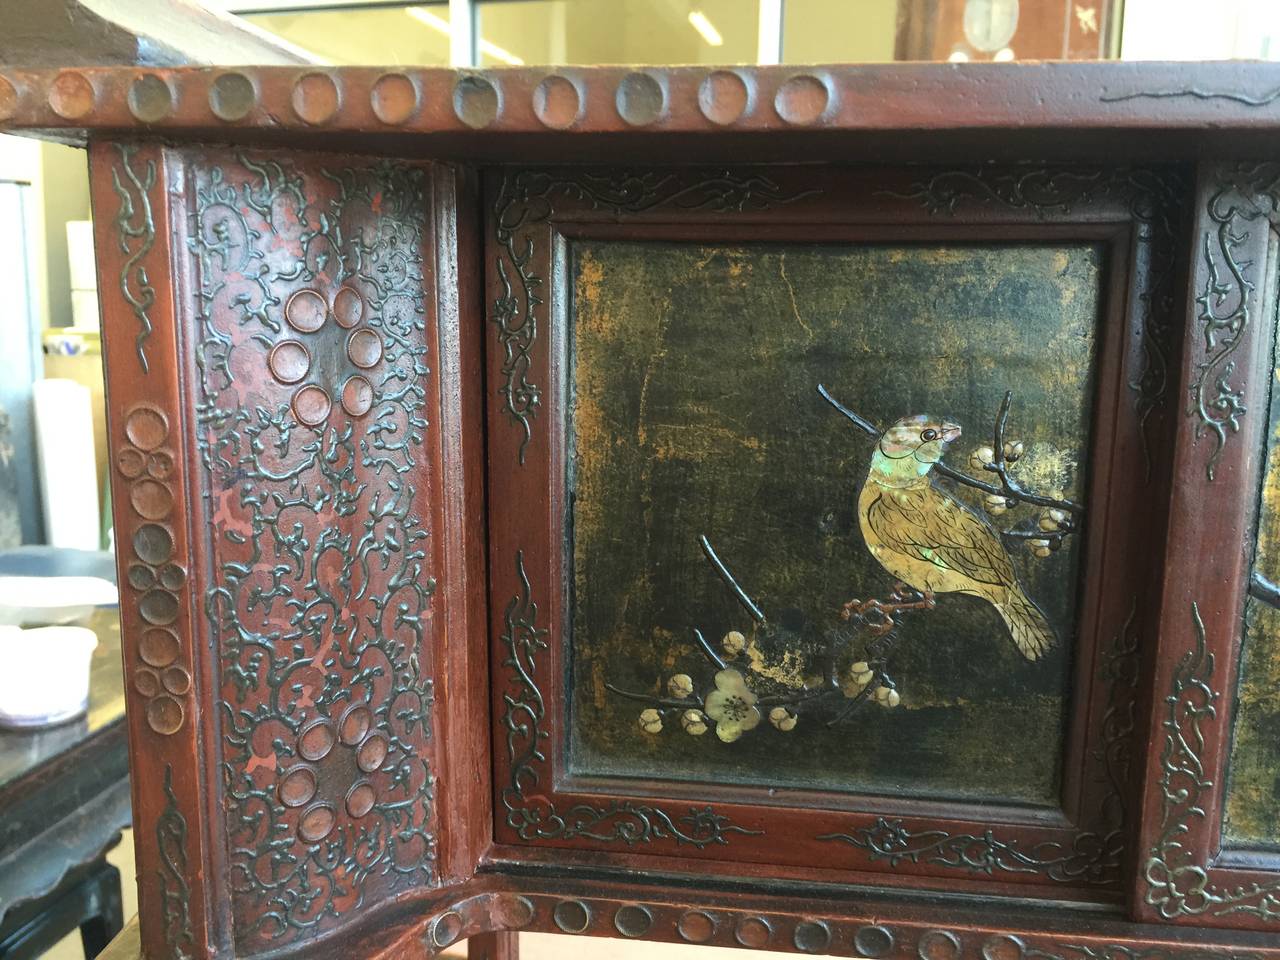 A beautiful antique Japanese lacquer cabinet with open shelves, doors and drawers.  The design on each panel is unique, and includes a tiger in a bamboo grove, geese, herons, figures and birds.

There is handpainted lacquer as well as mother of